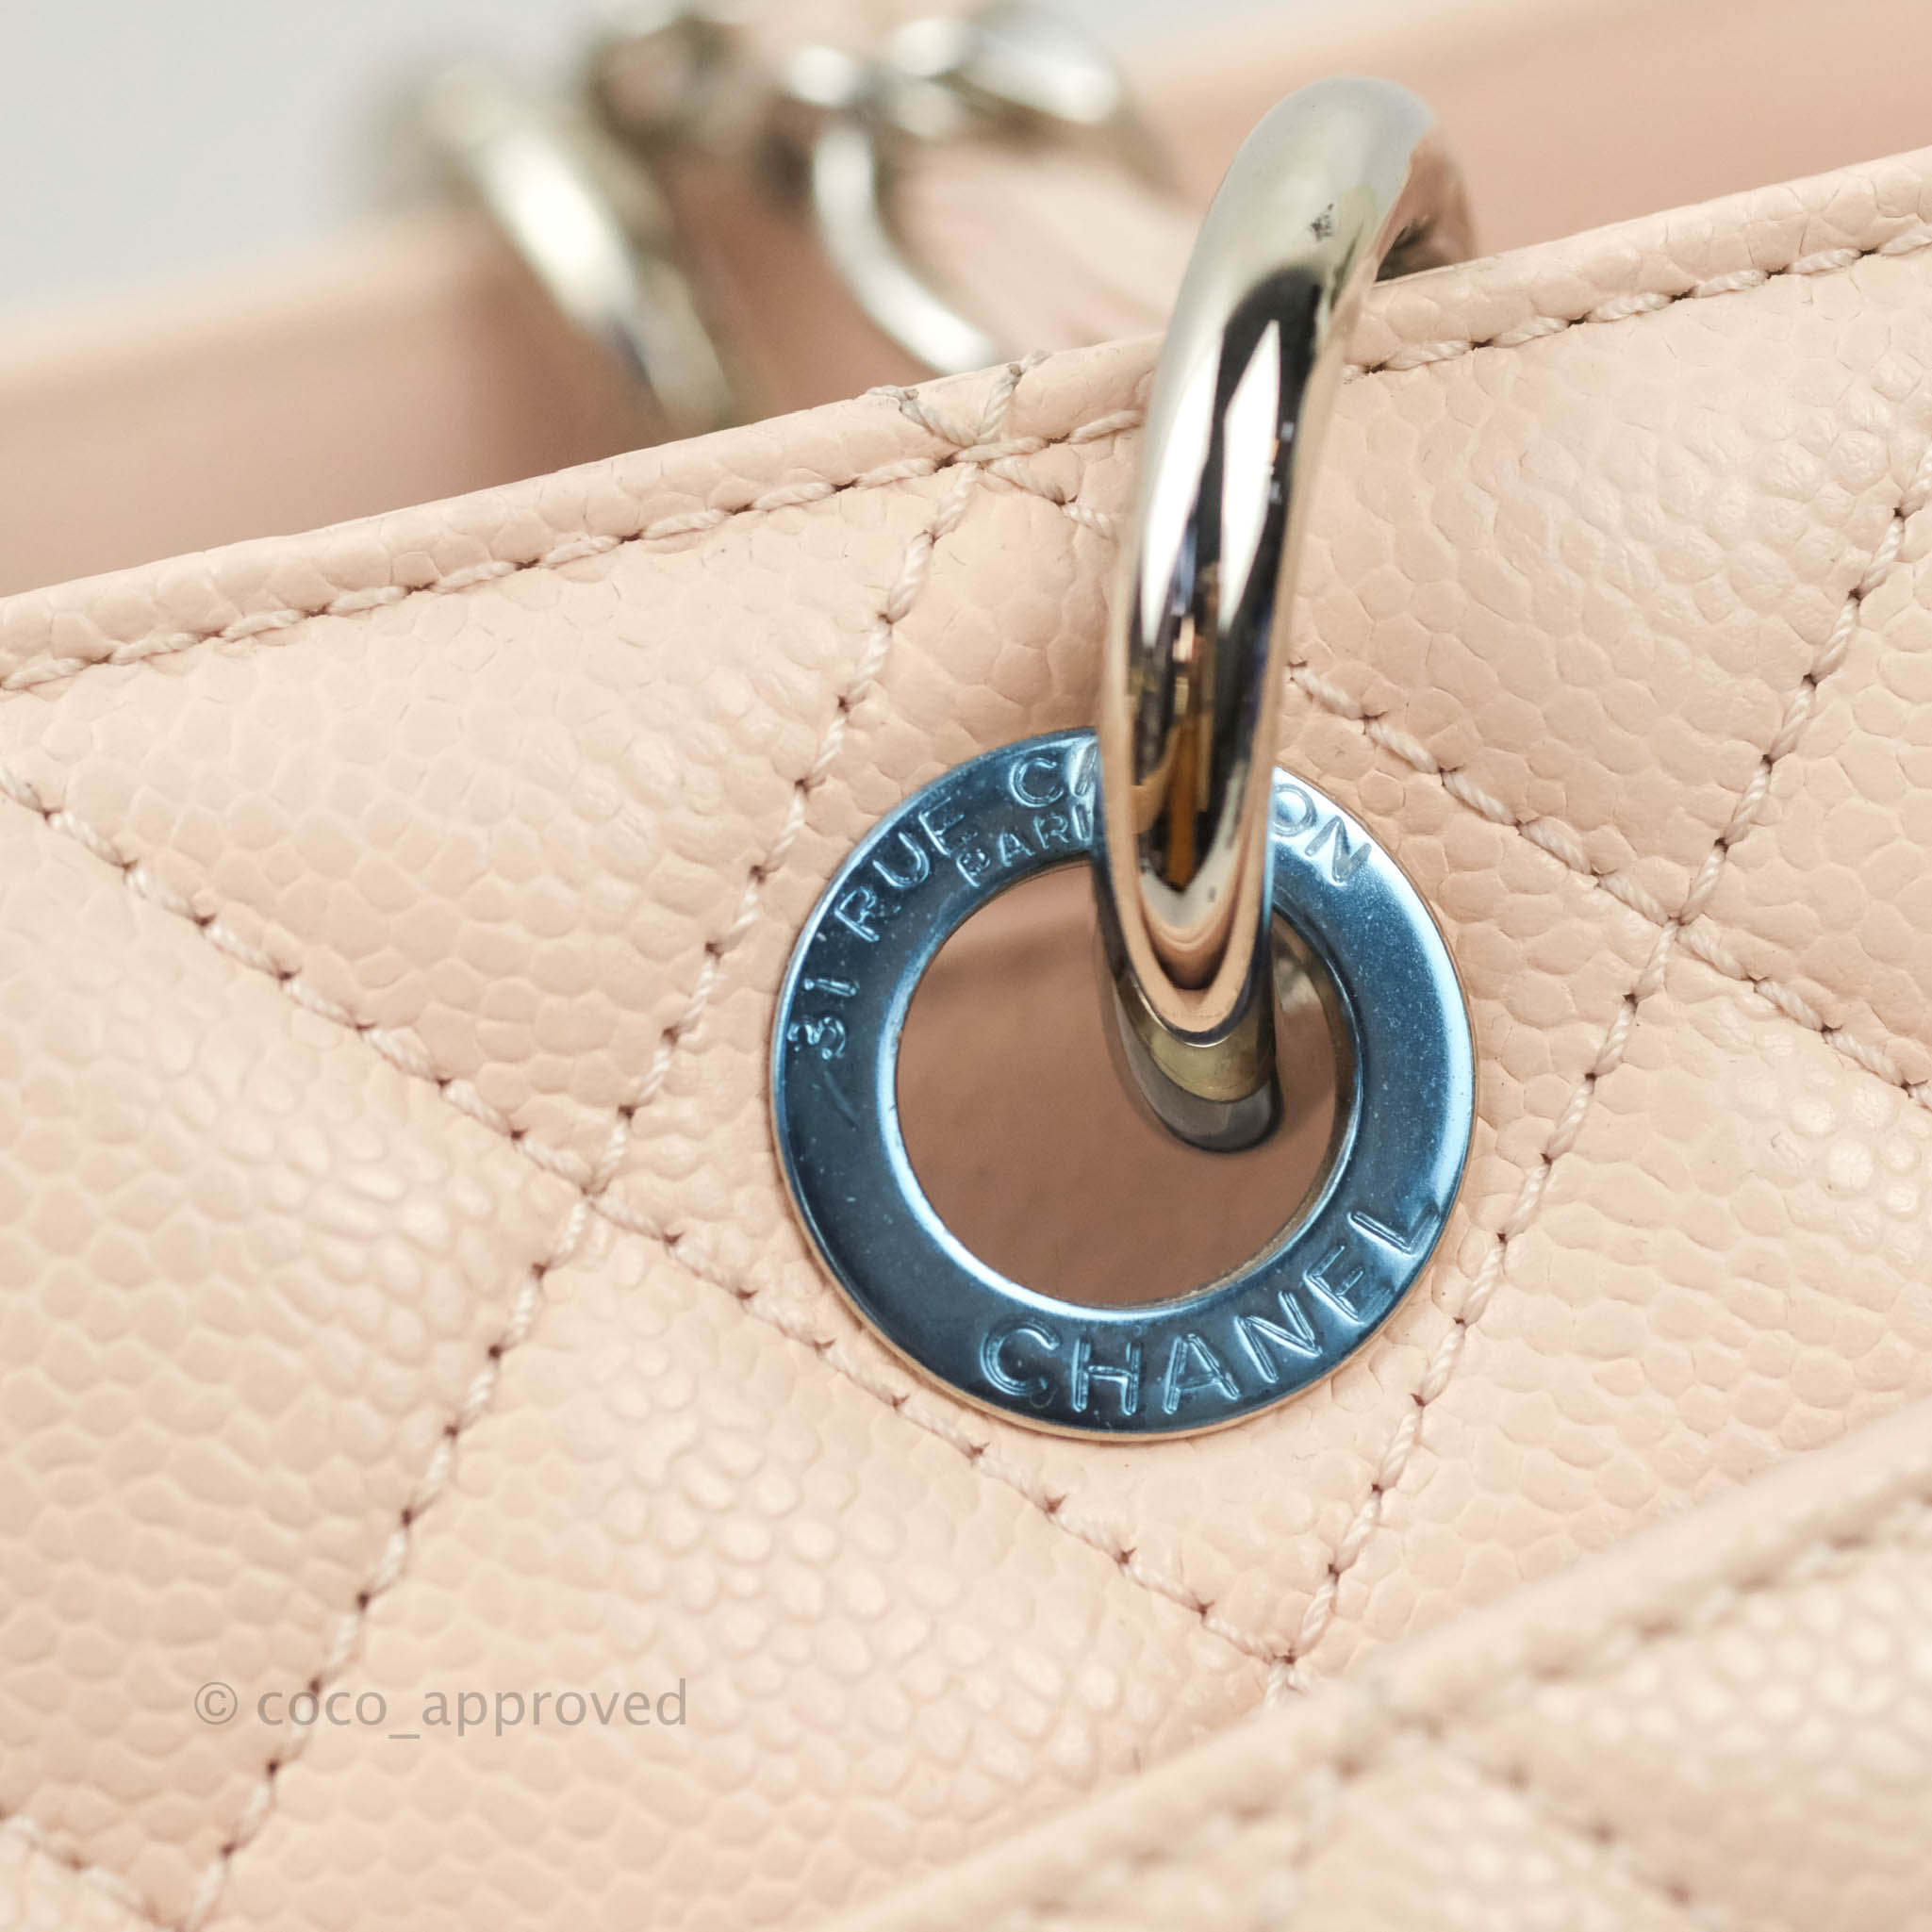 Chanel GST Light Pink Caviar Silver Hardware – Coco Approved Studio